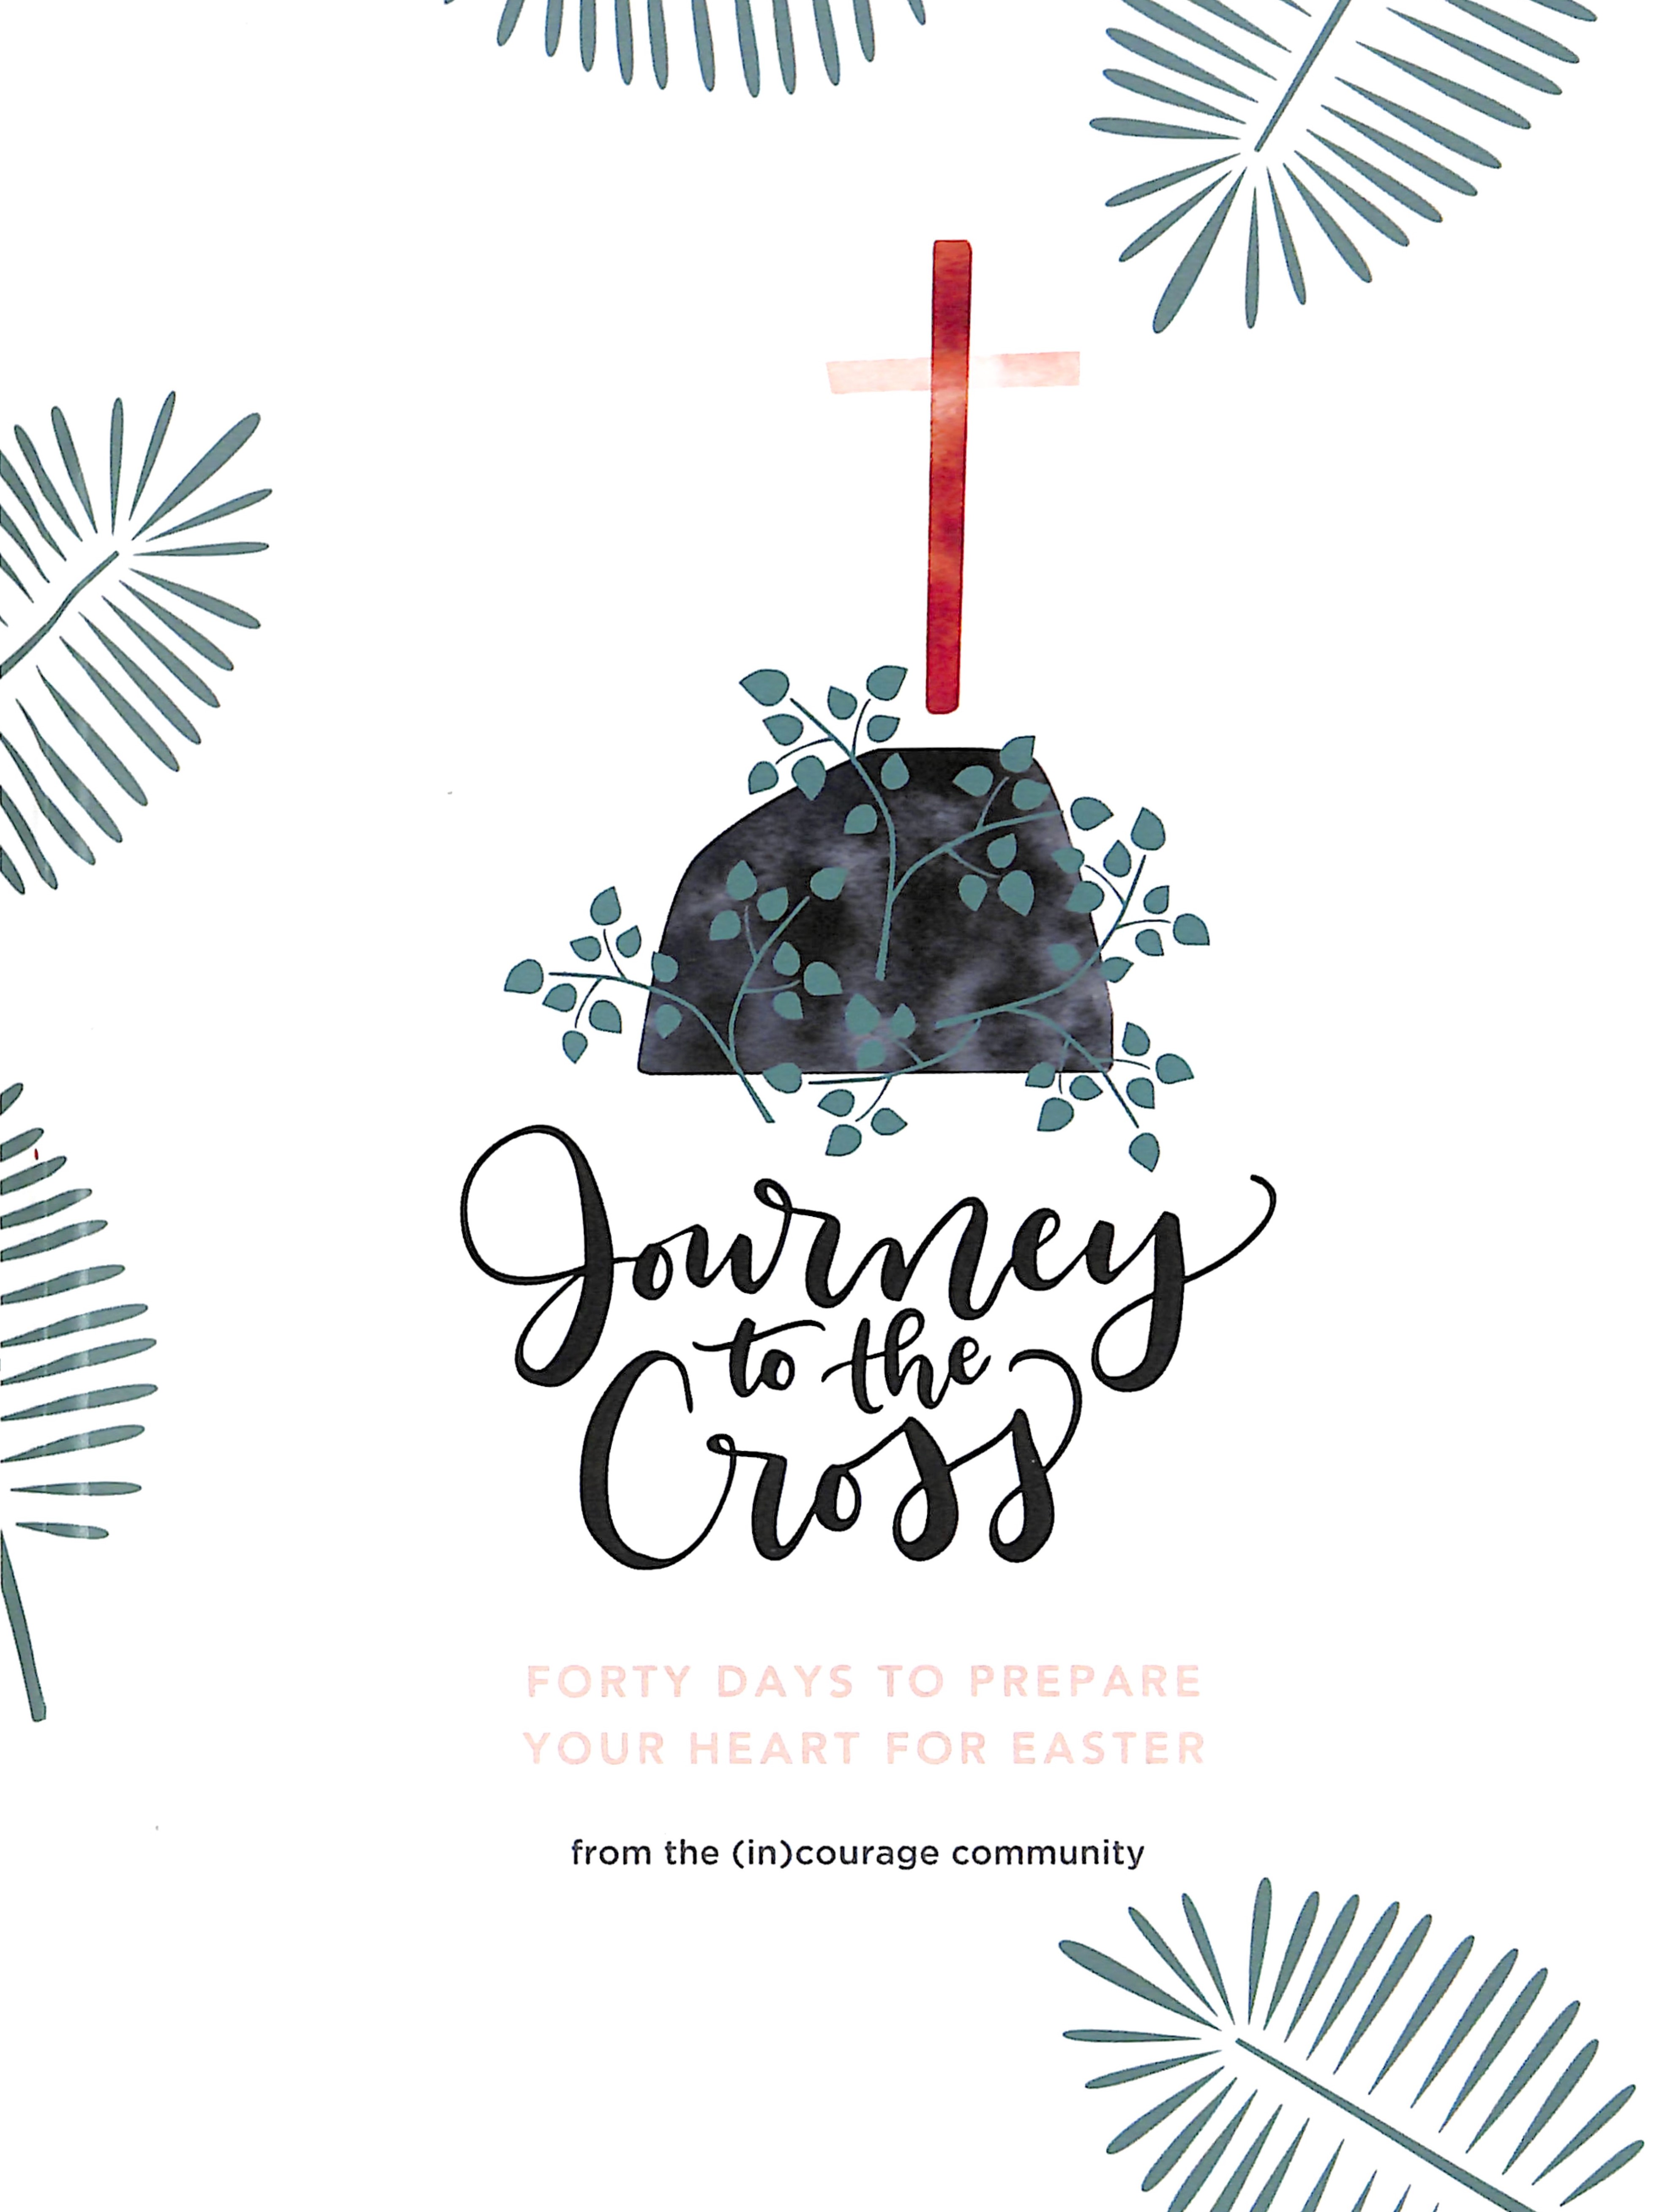 Journey to the Cross: 40 Days to Prepare Your Heart For Easter